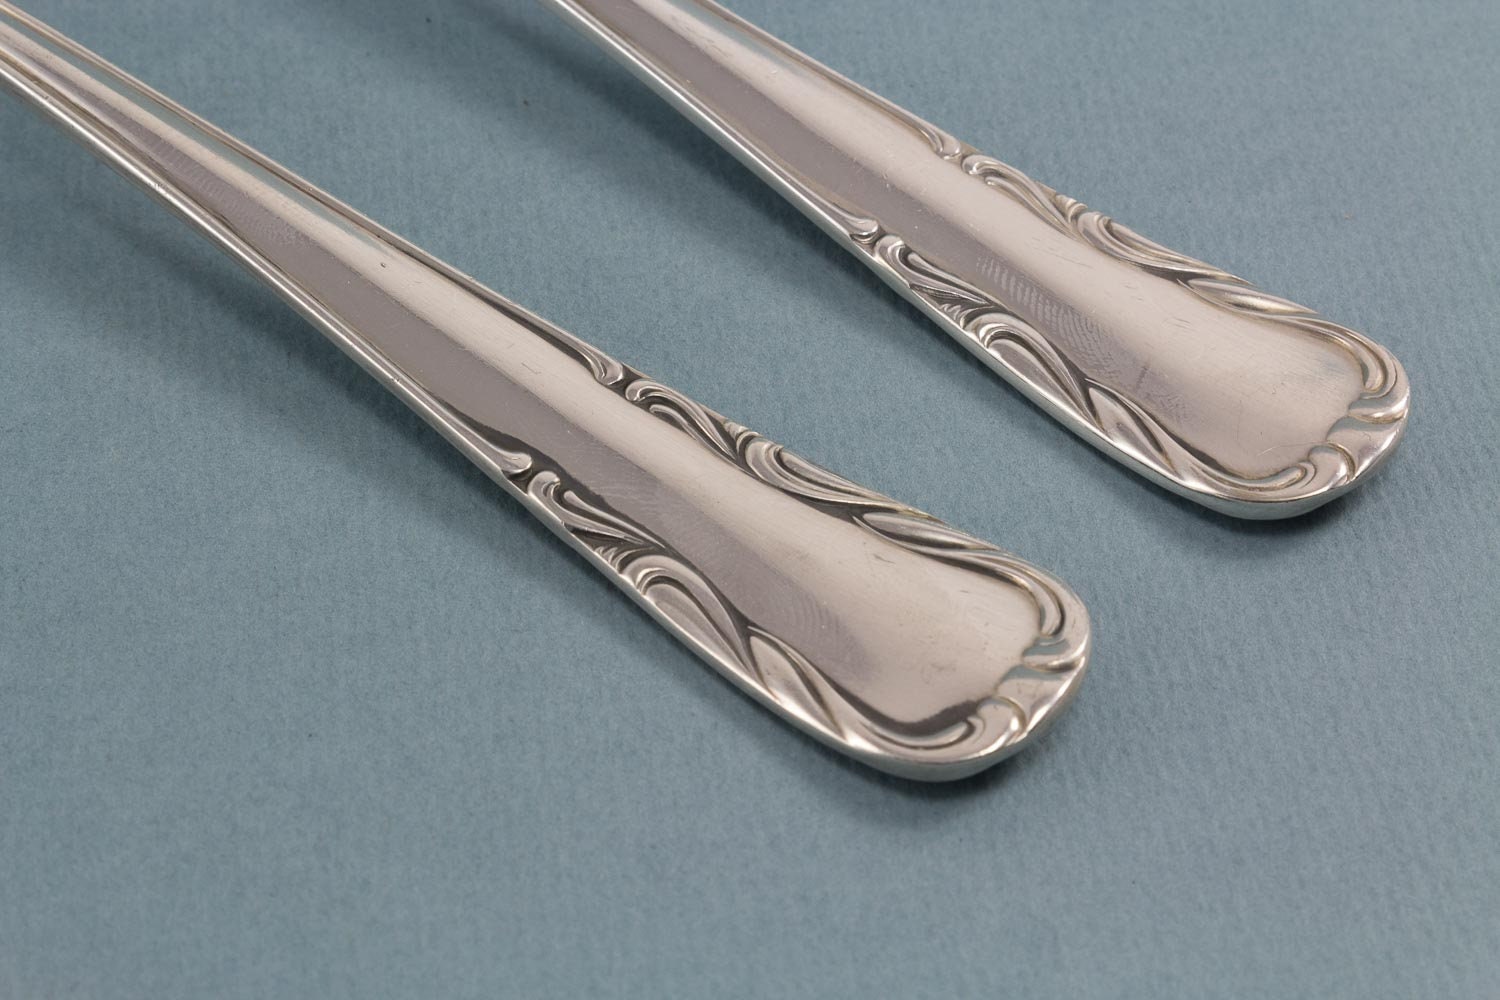 Cheese knife and butter knife, silver plated knives